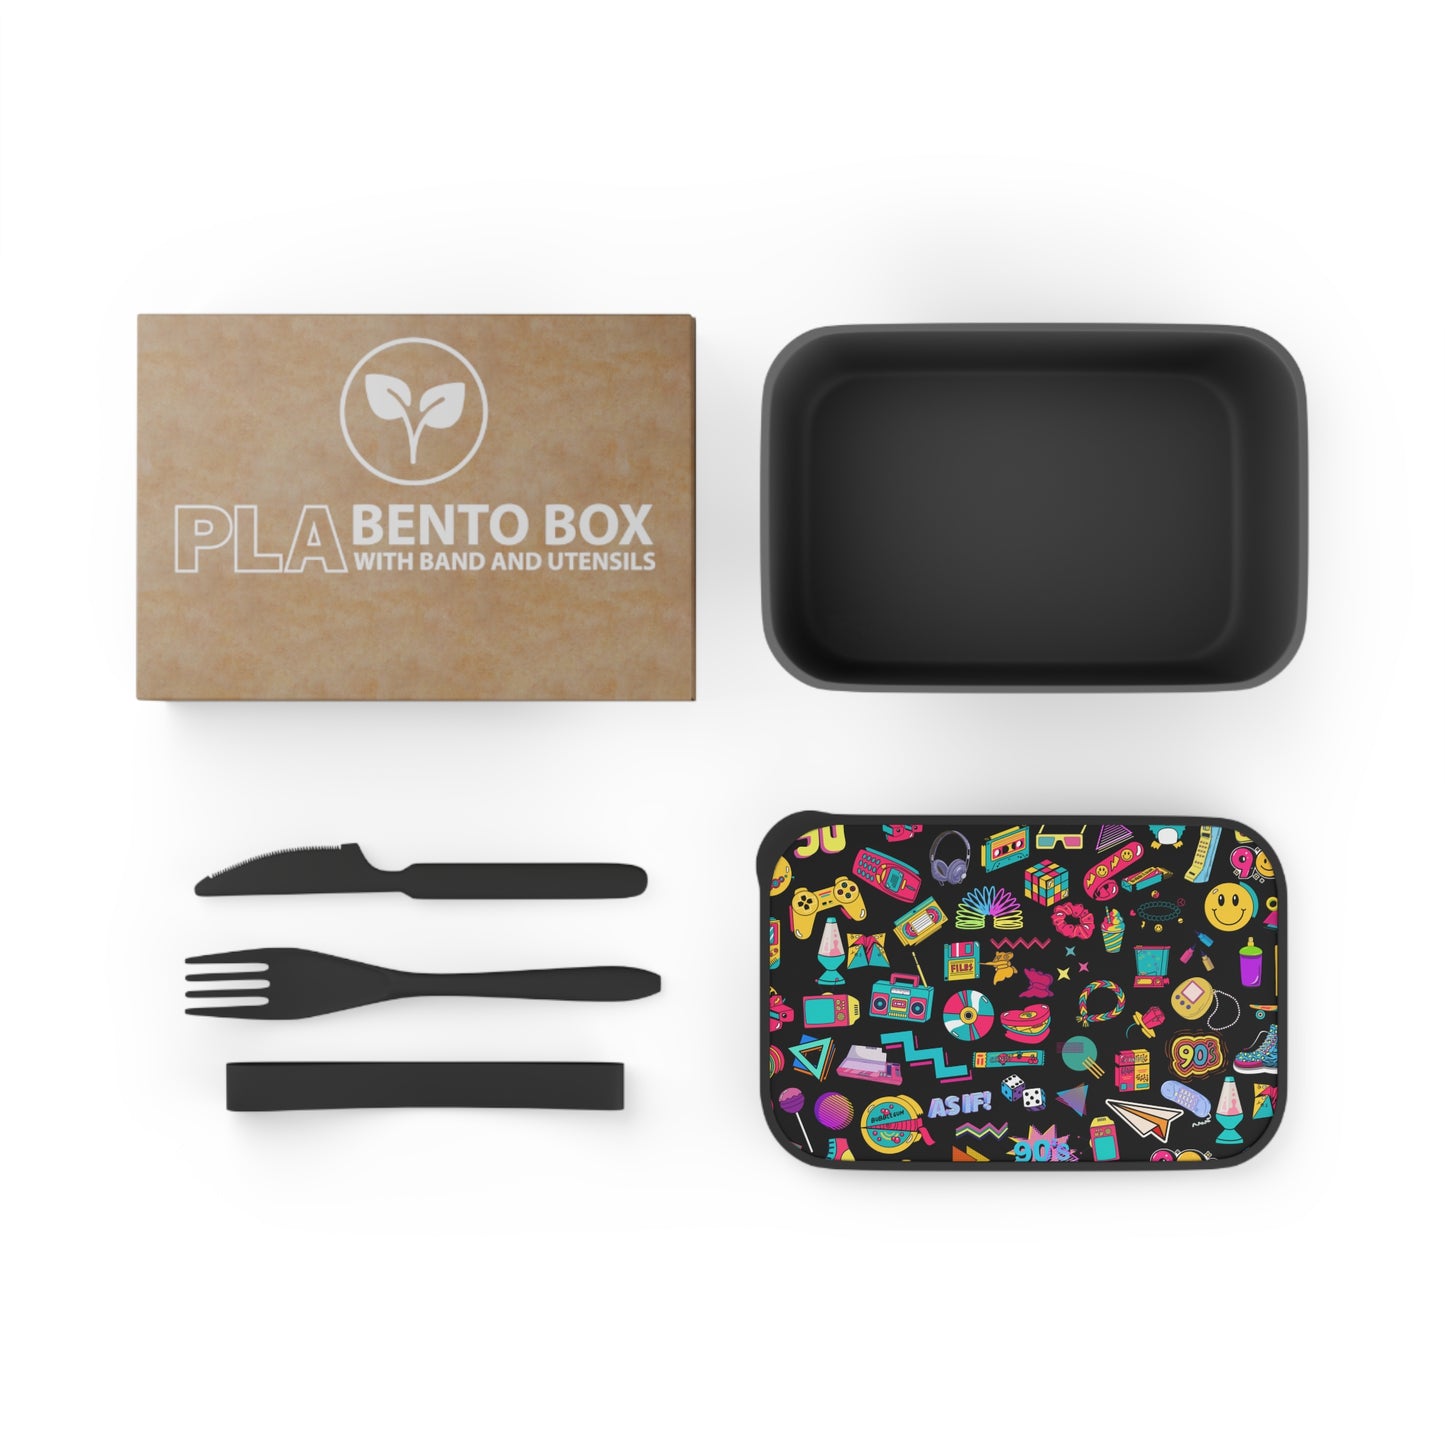 90s. Old School, PLA Bento Box with Band and Utensils, Free Shipping